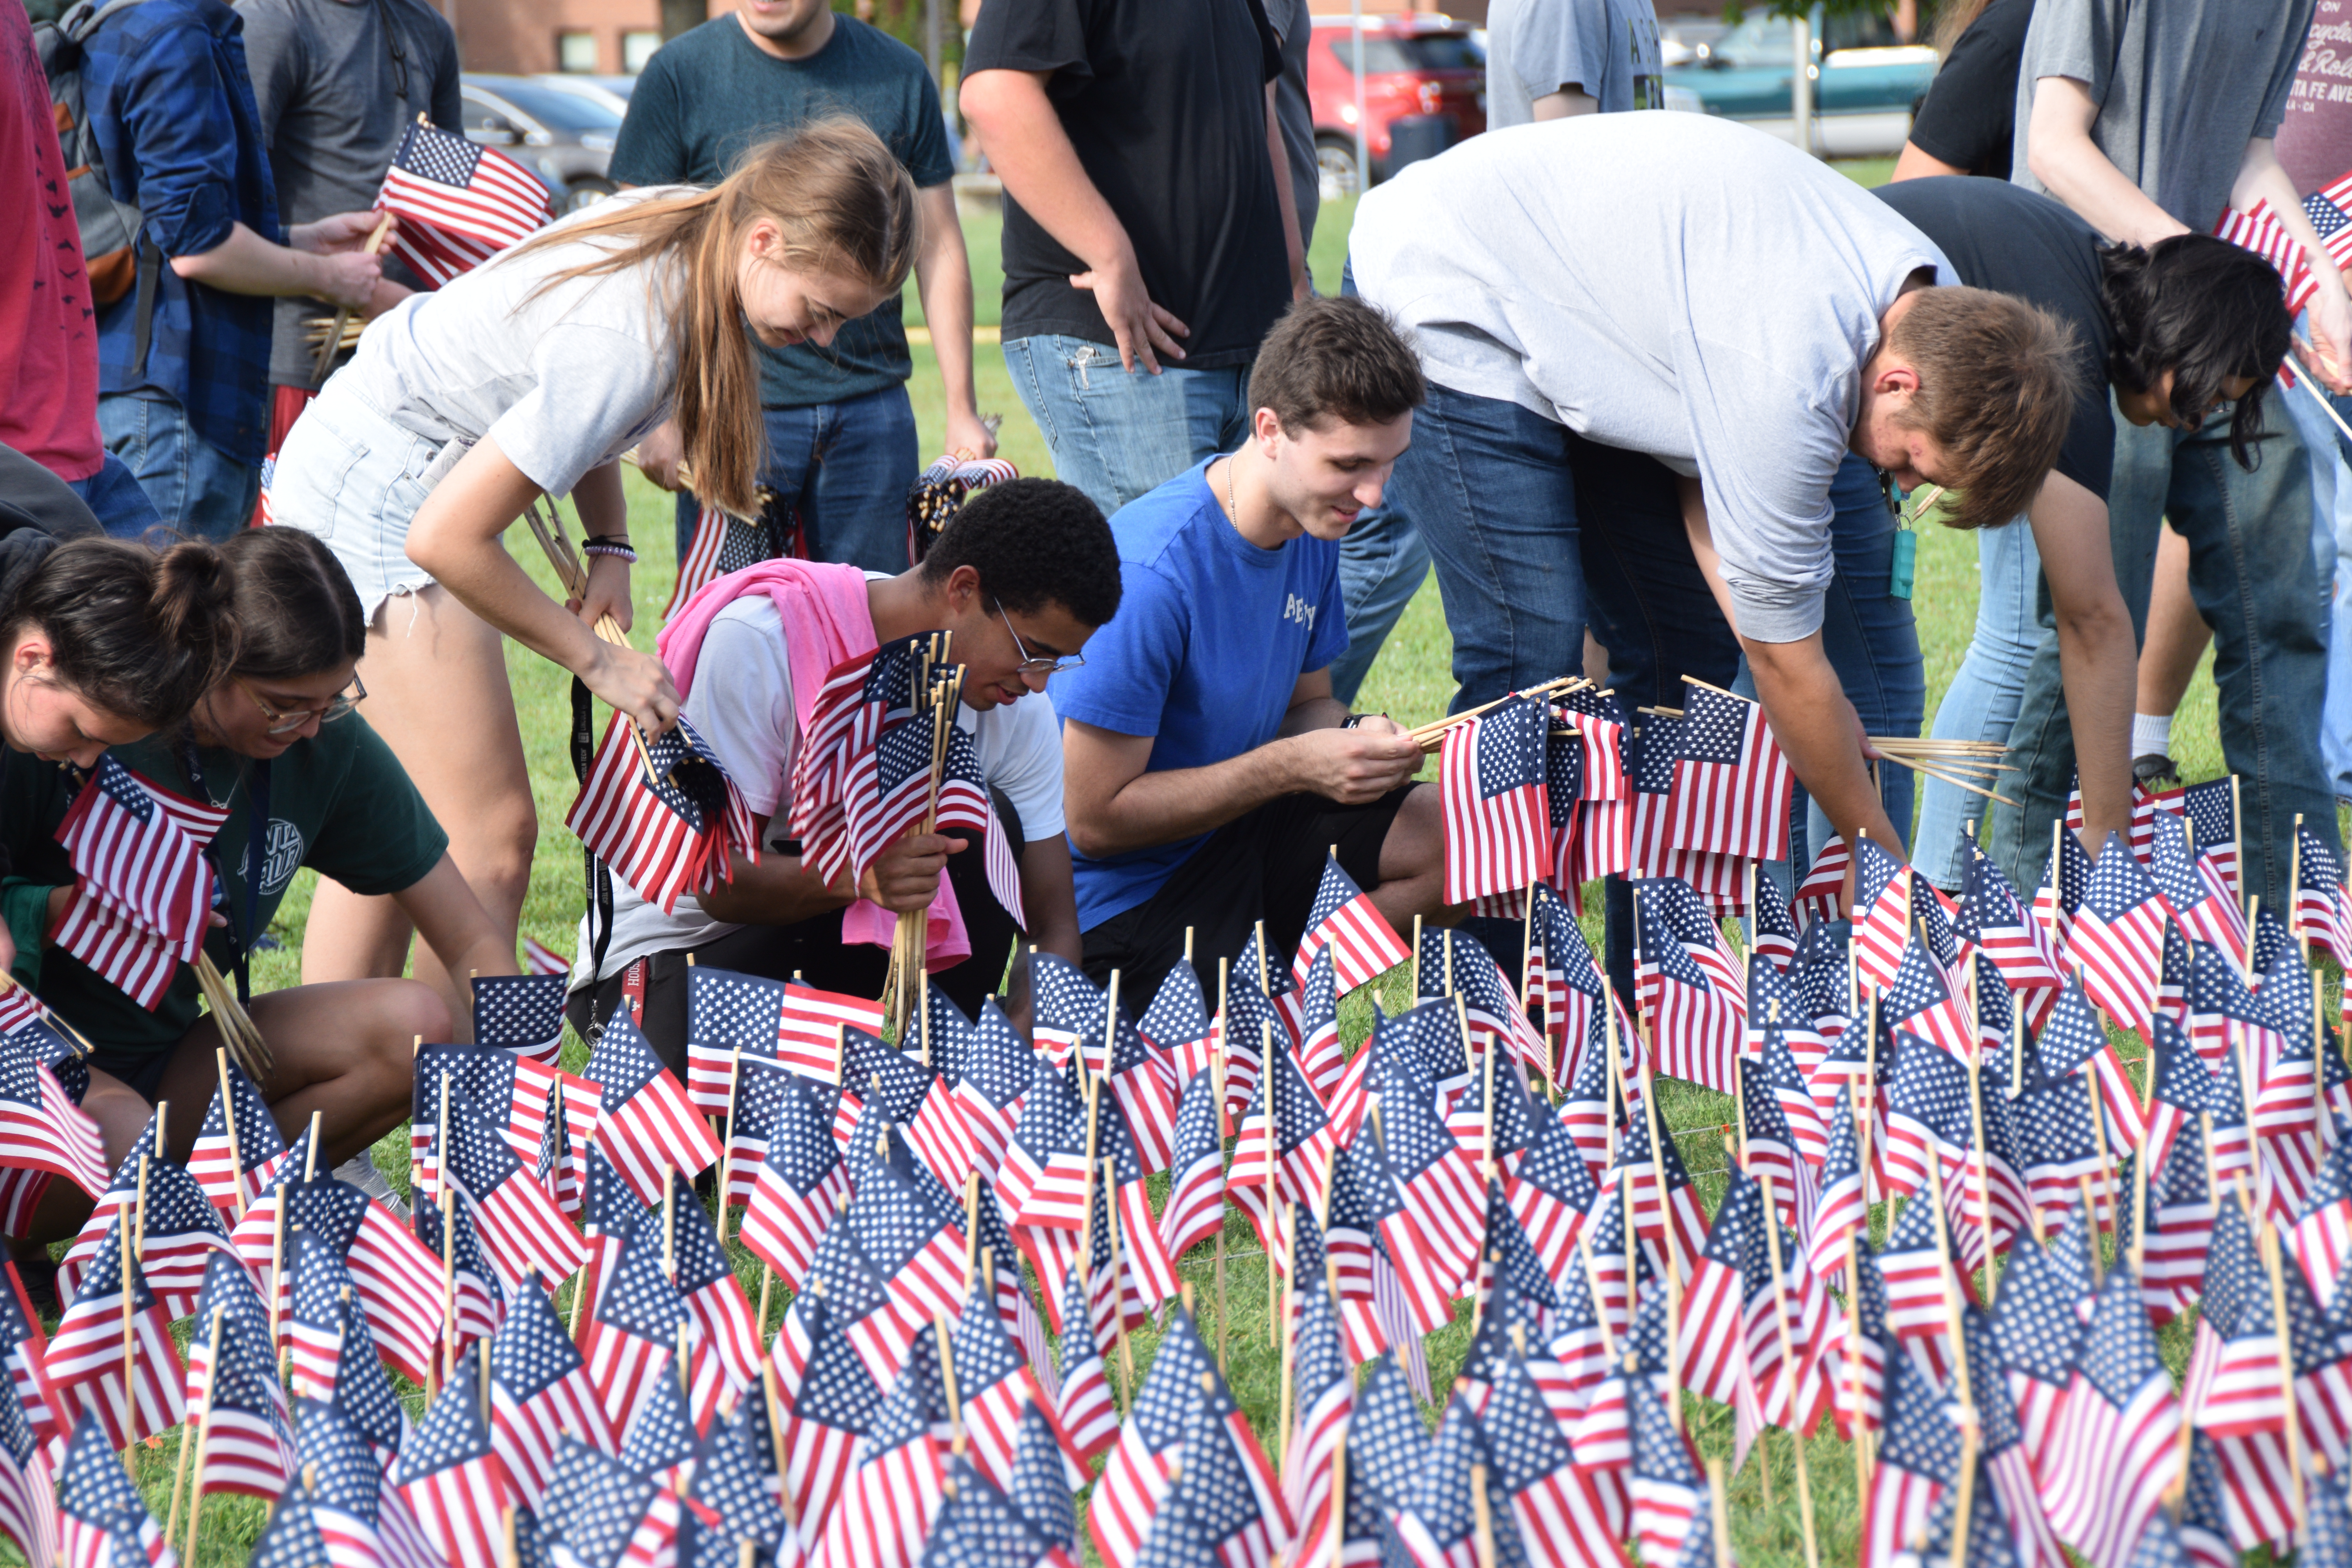 VU students holding and placing small American flags in the grass to create a 9/11 flag memorial.